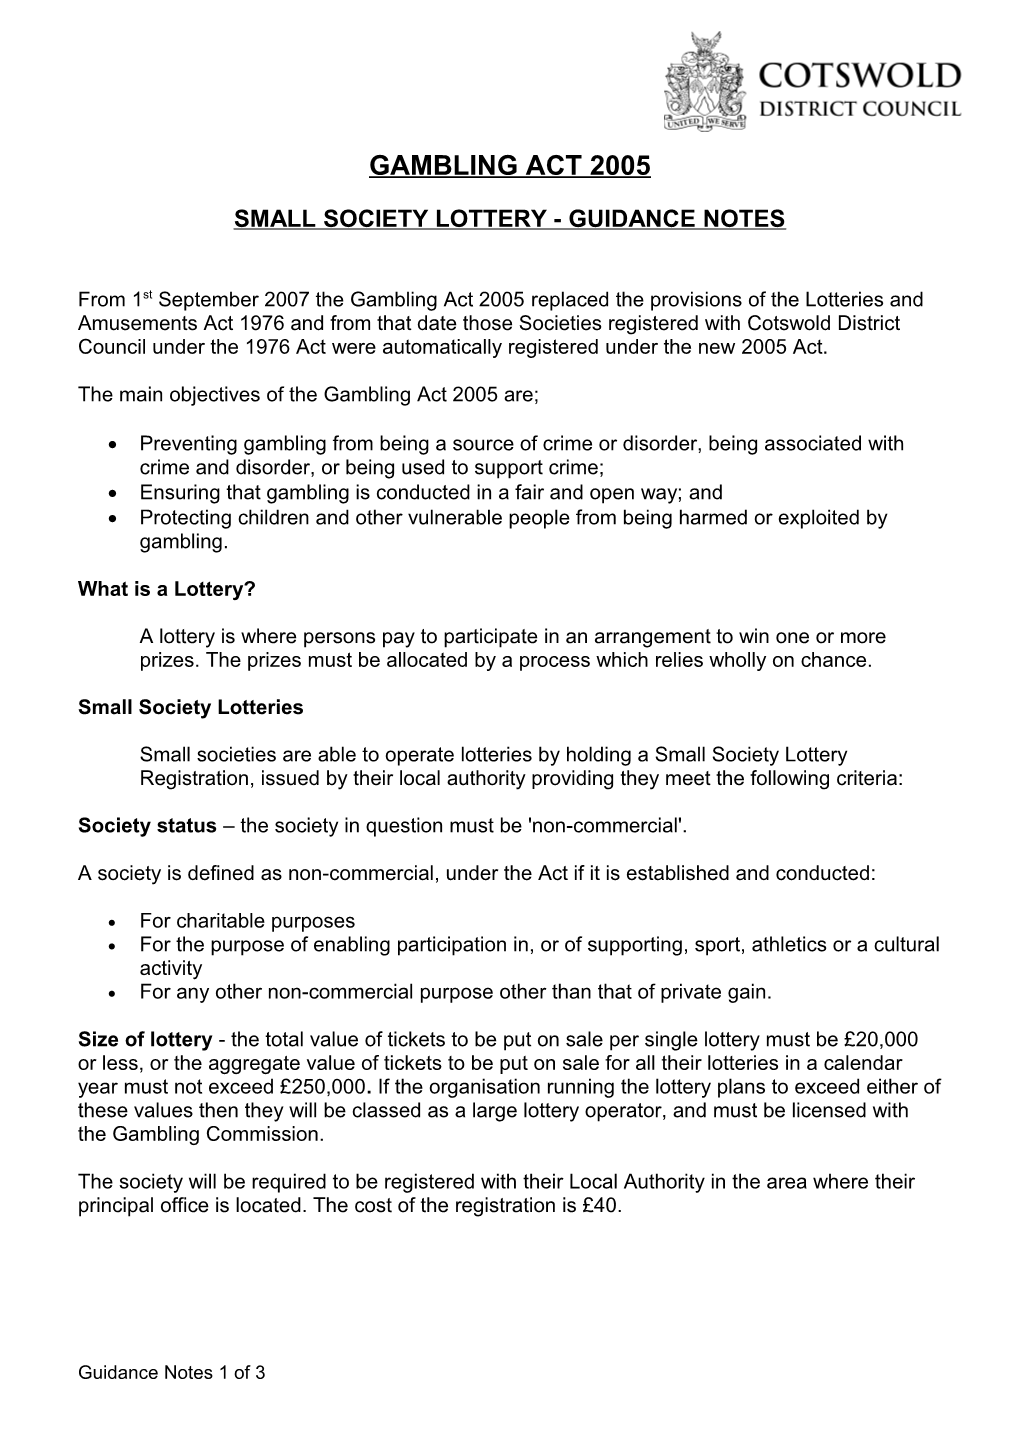 Small Society Lottery - Guidance Notes